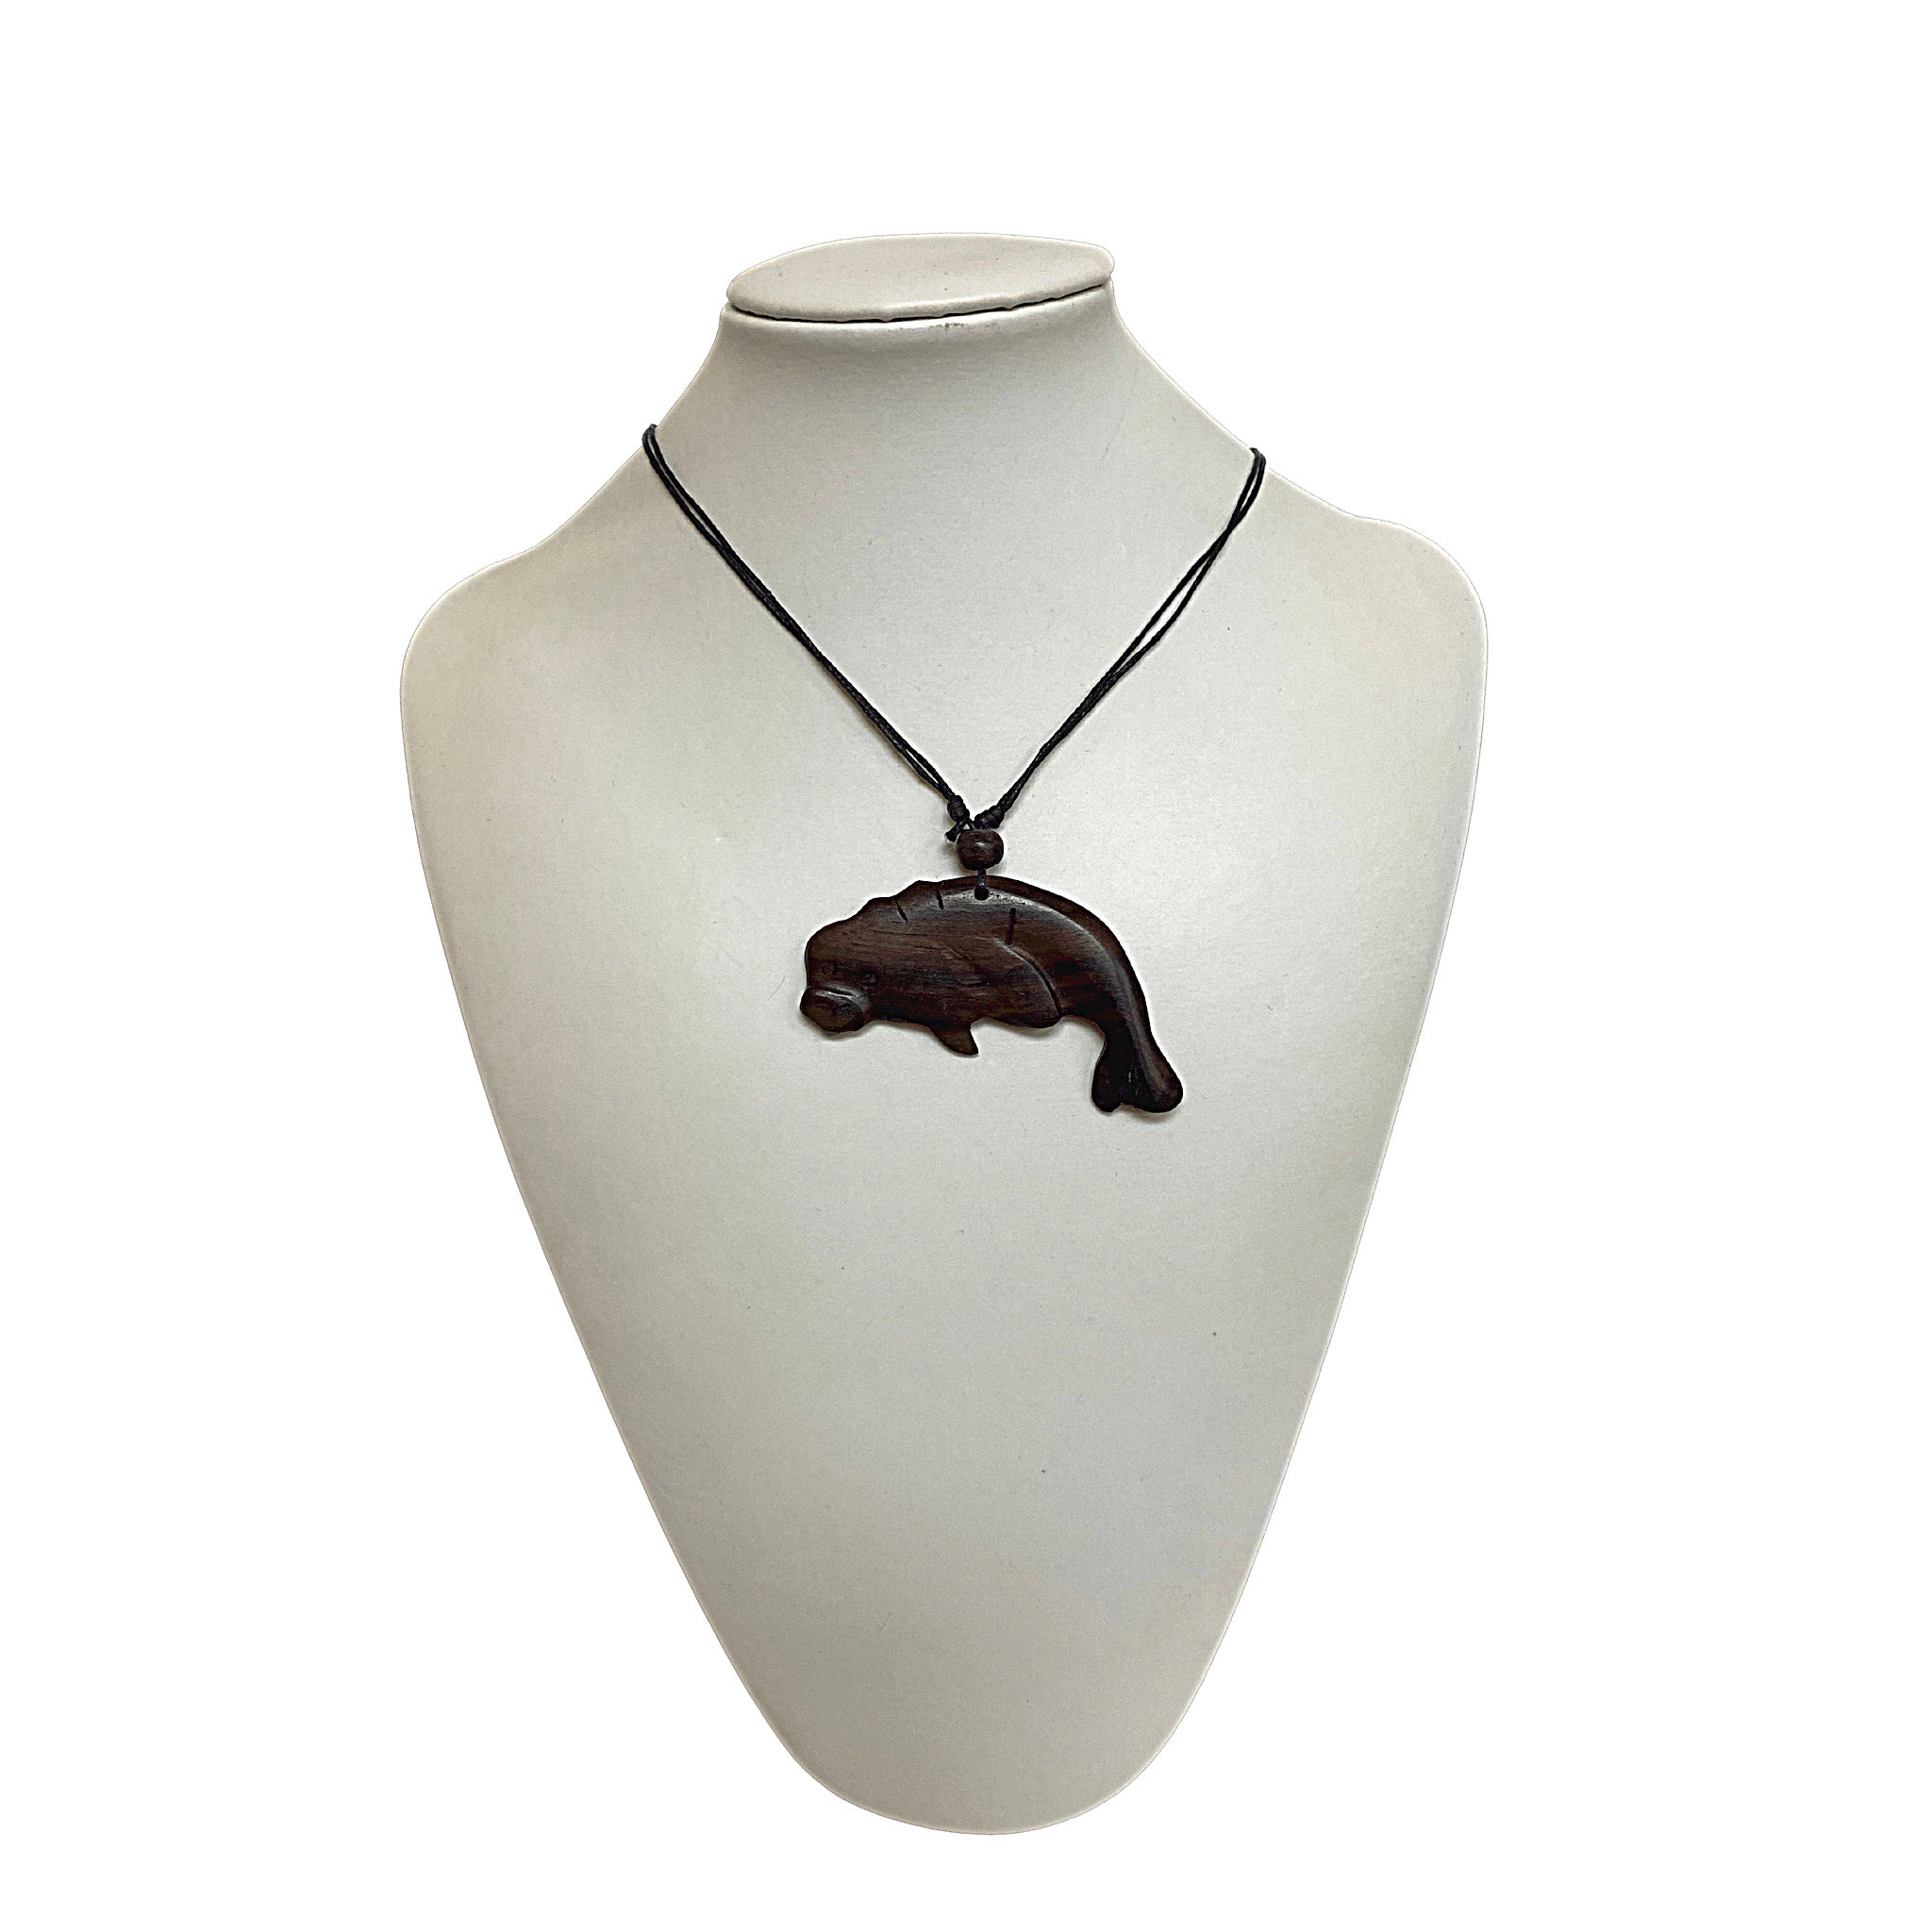 Dolphin Necklace Wooden hand carved Dolphine necklace  Ironwood Personolaized Wooden  Pendant, Sea Animal Nautical Wood Jewelry One of a Kind Gift for Him Her - Tobmarc Home Decor & Gifts 